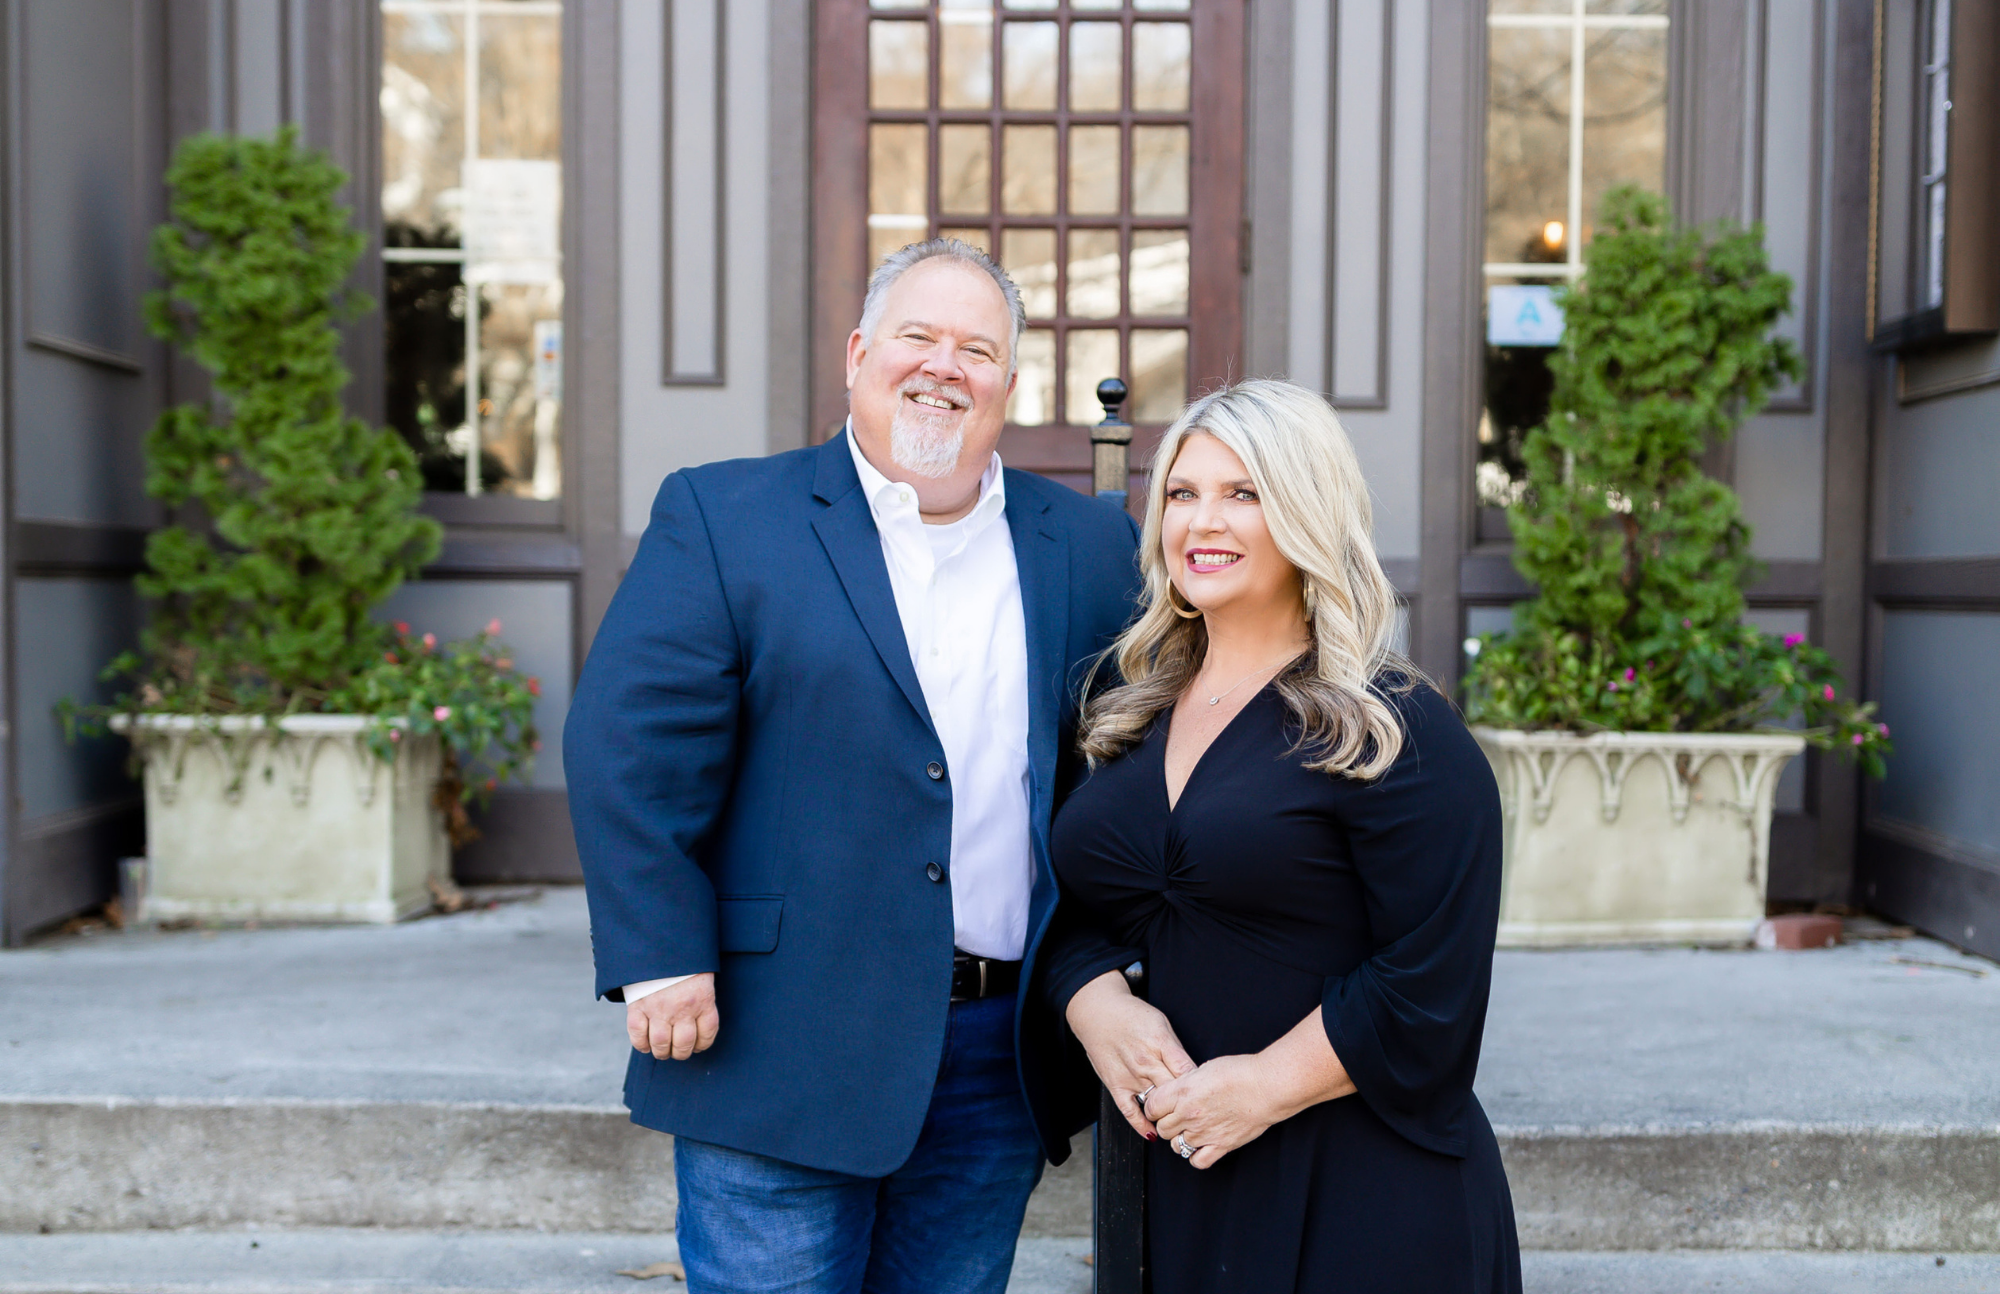 February Top Producer – Paige & George Boykin